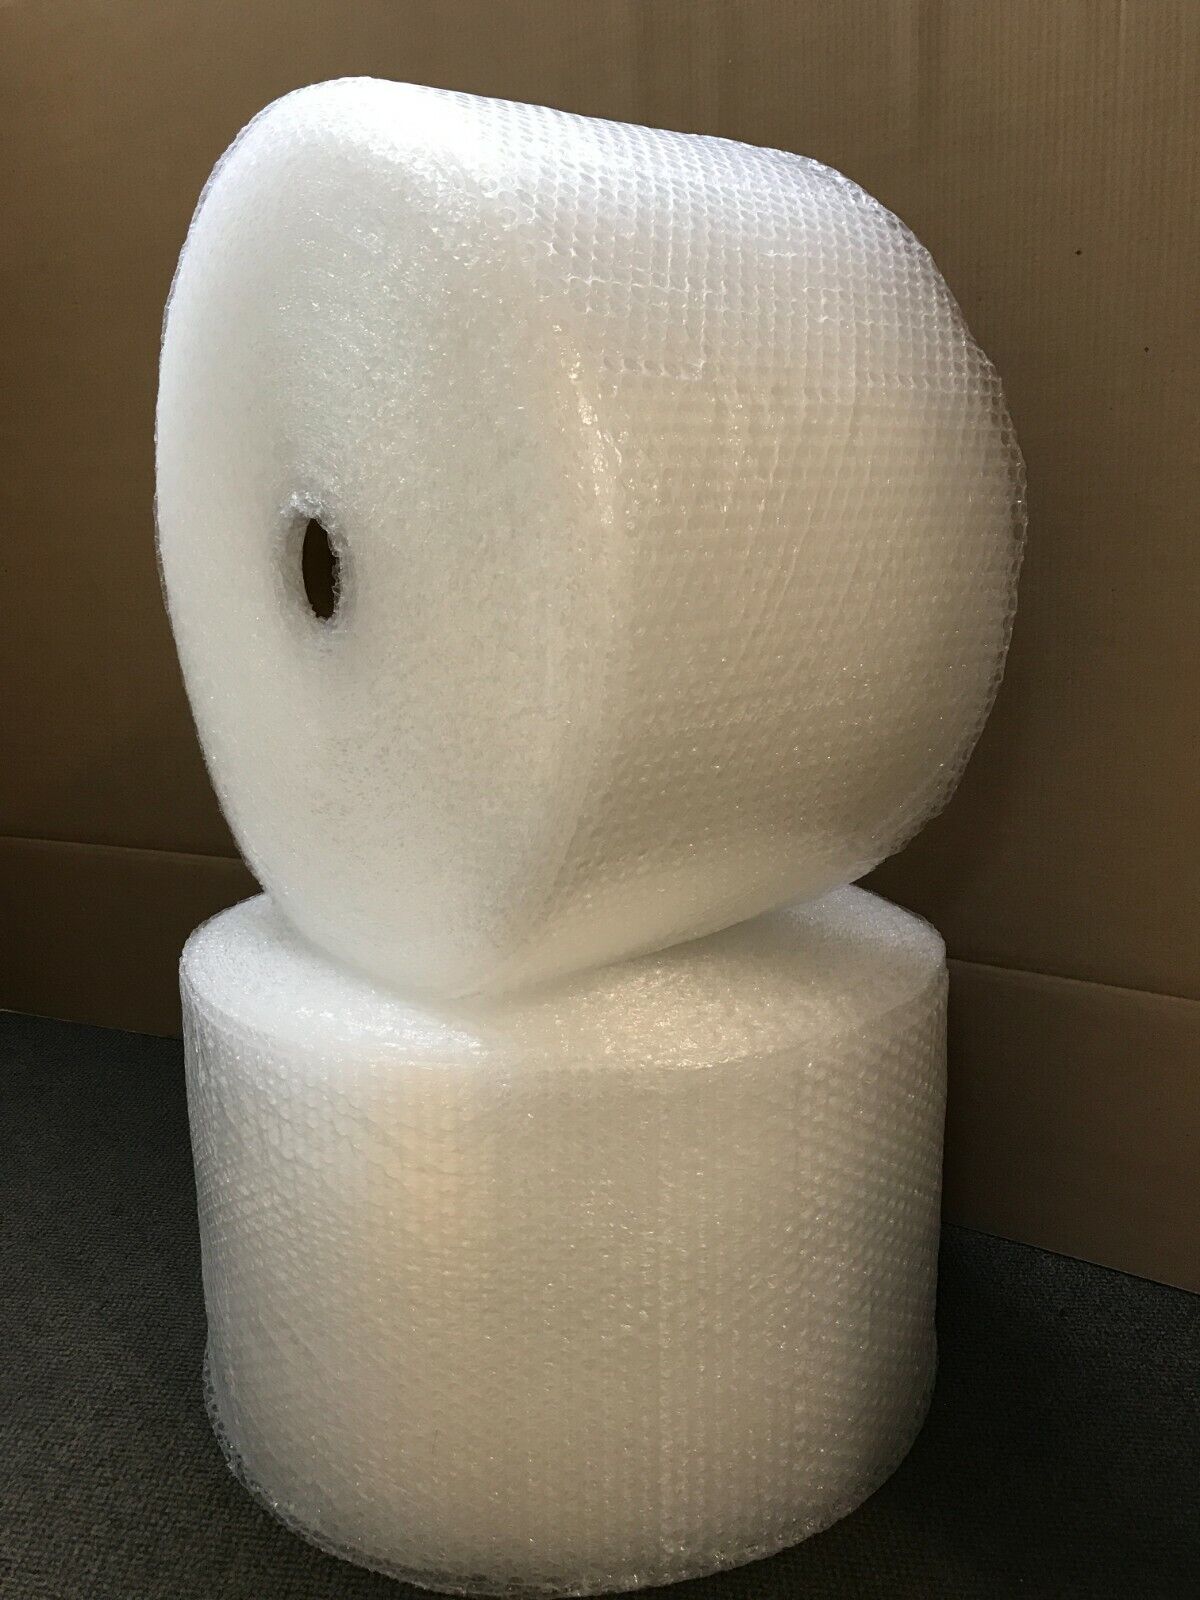 3/16" Small Bubble Cushioning Wrap Padding Roll 700'x 12" Wide Perf 12" 700FT